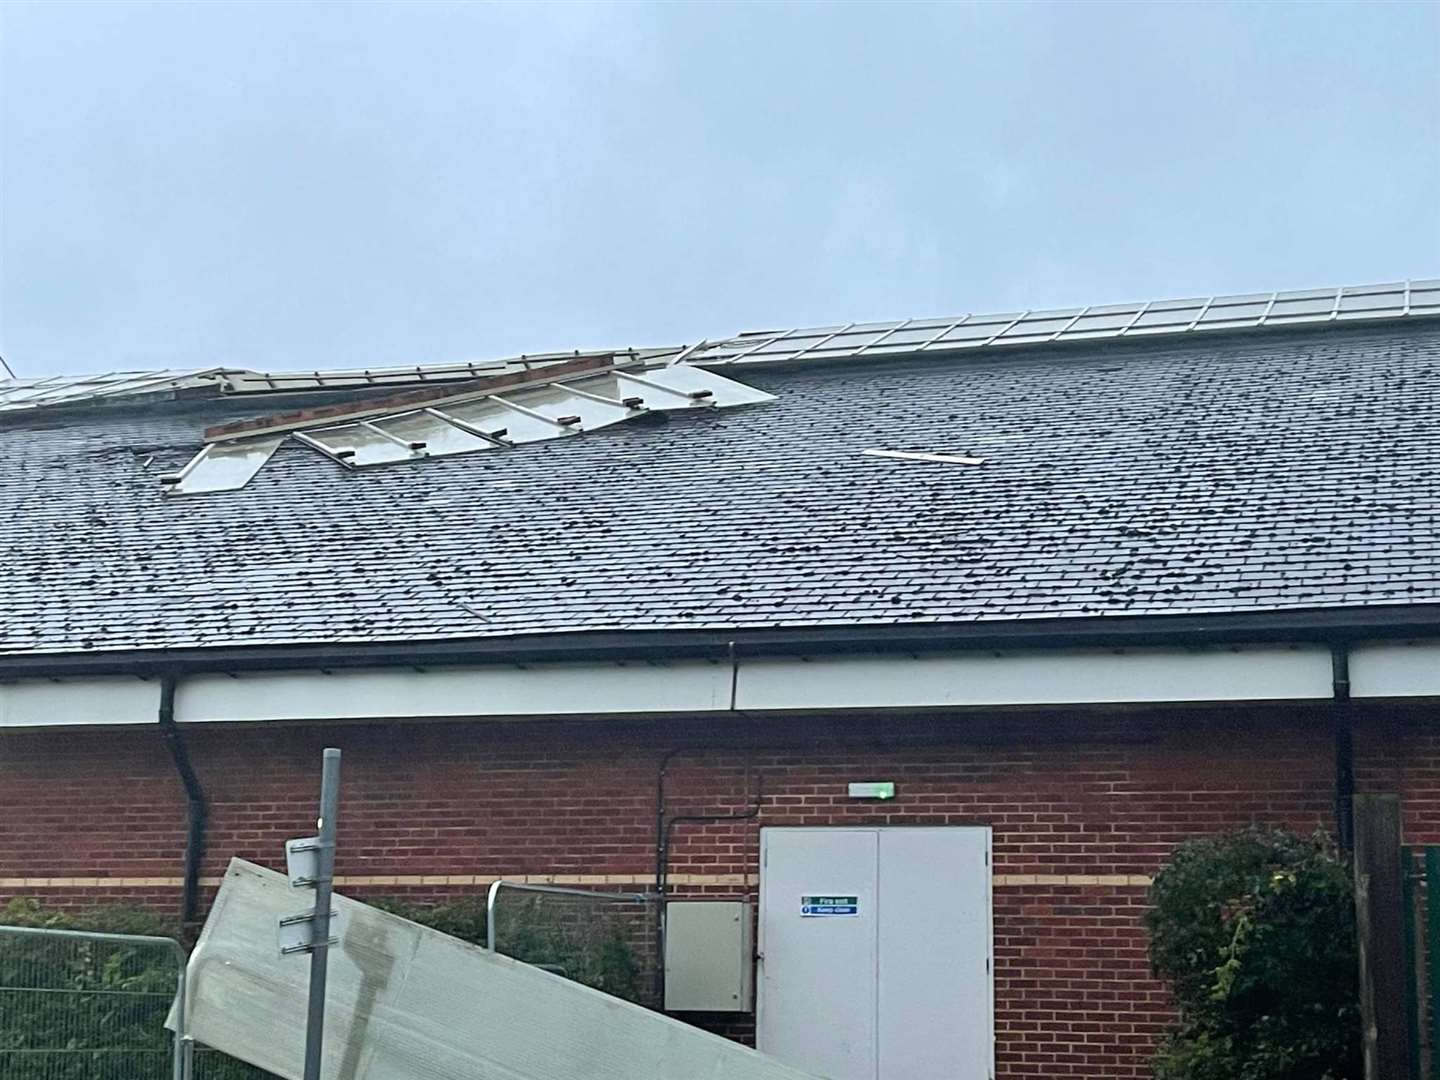 The damage to the roof on Sunday morning. Photo: Tenterden Leisure Centre